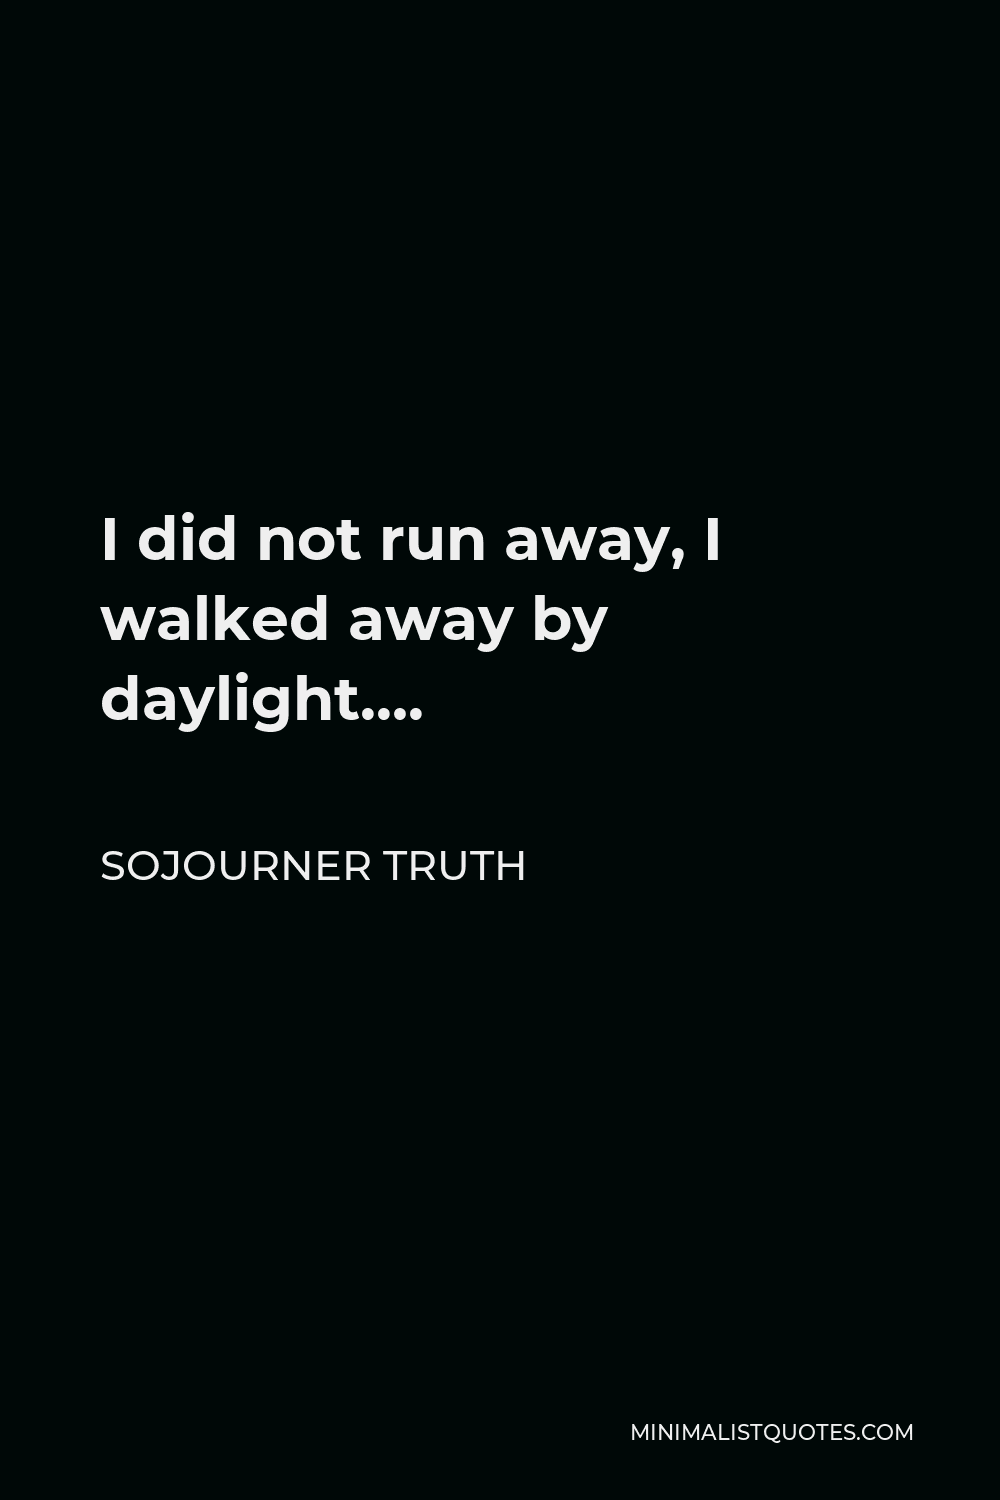 Sojourner Truth Quote - I did not run away, I walked away by daylight….